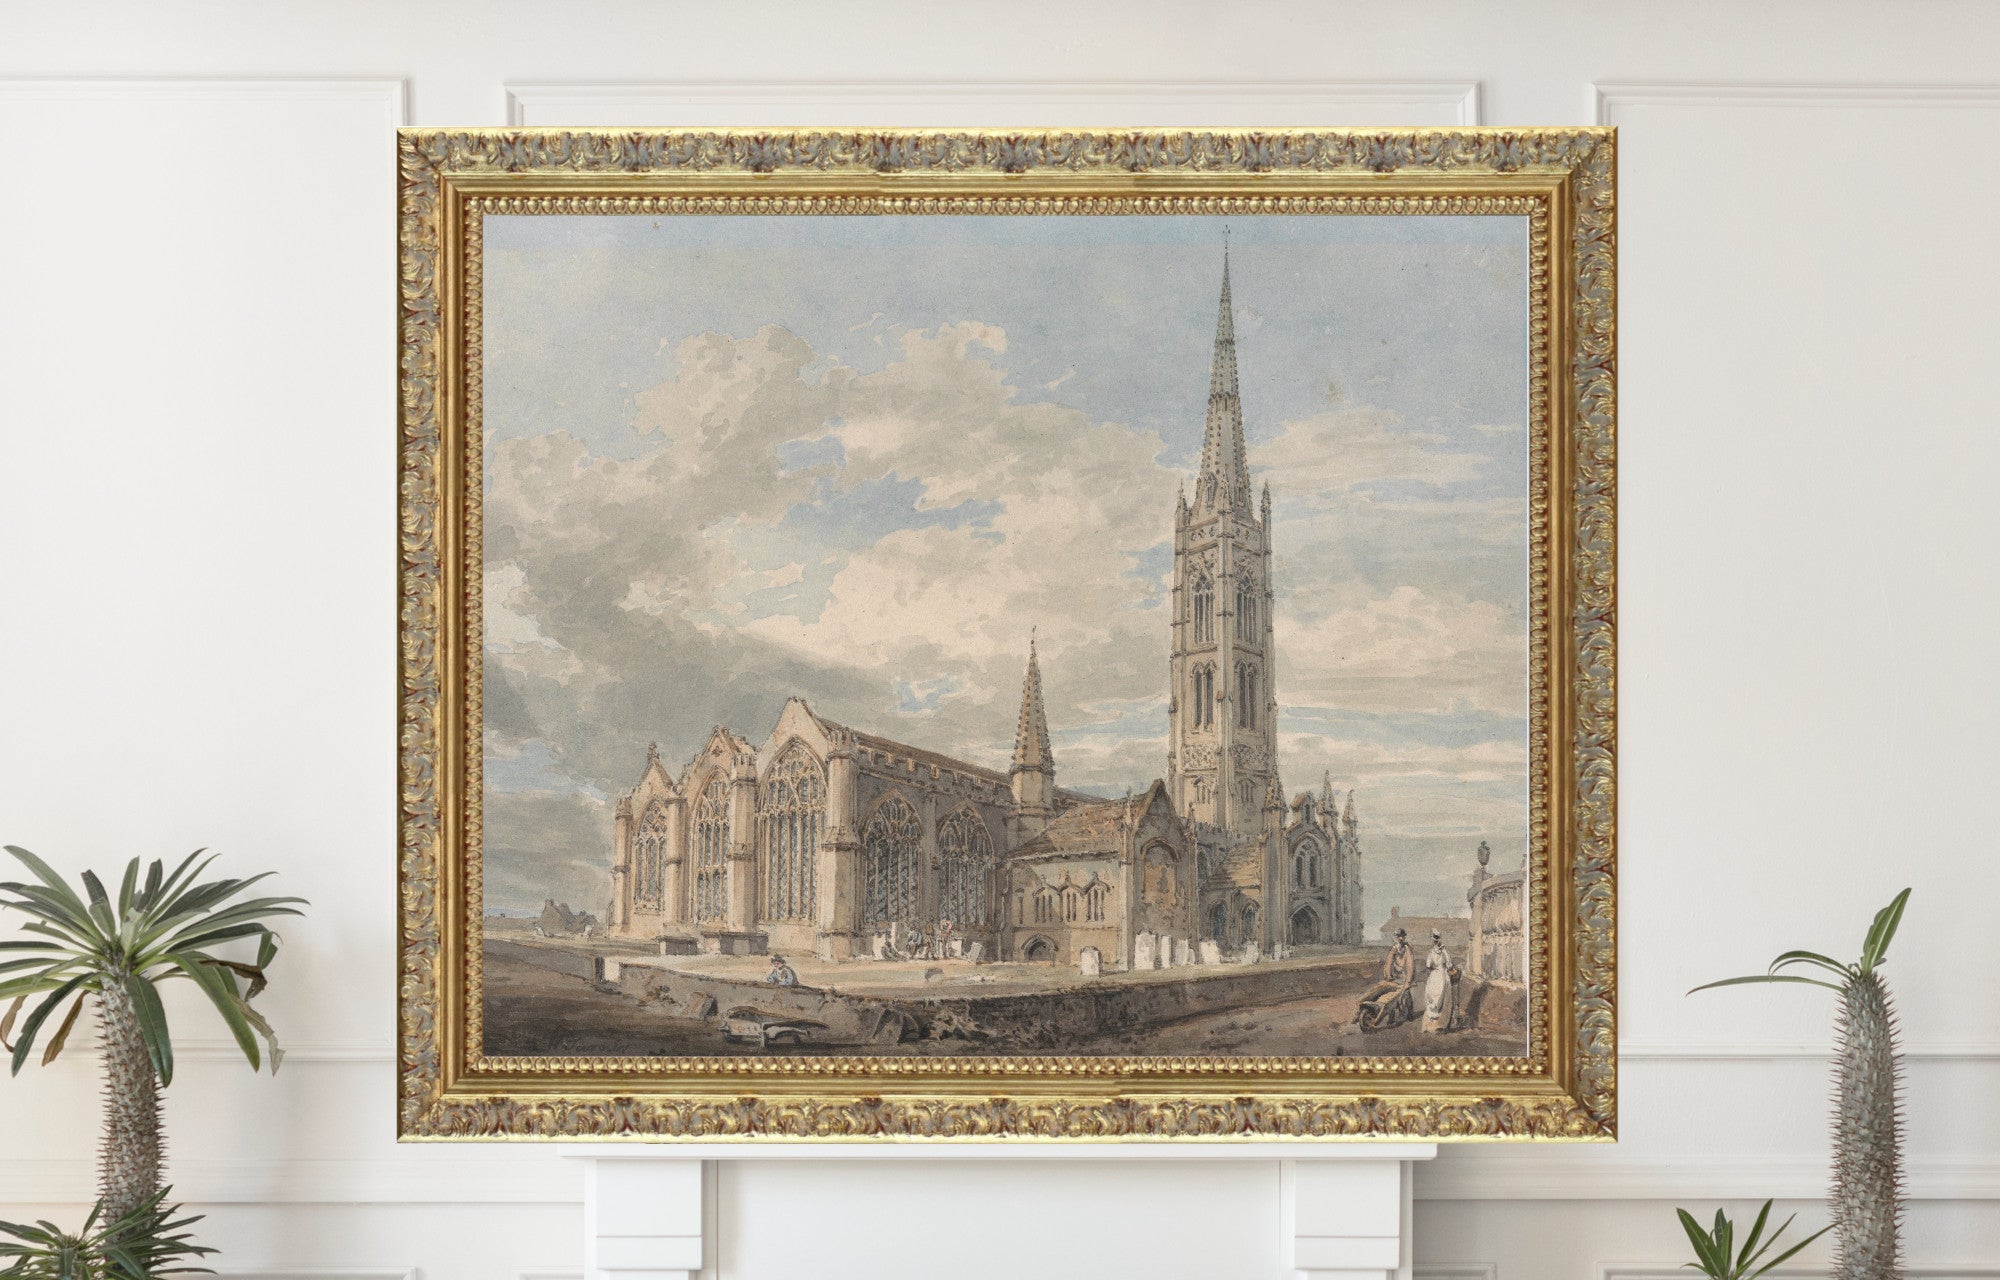 North East View of Grantham Church, Lincolnshire (1797) by William Turner